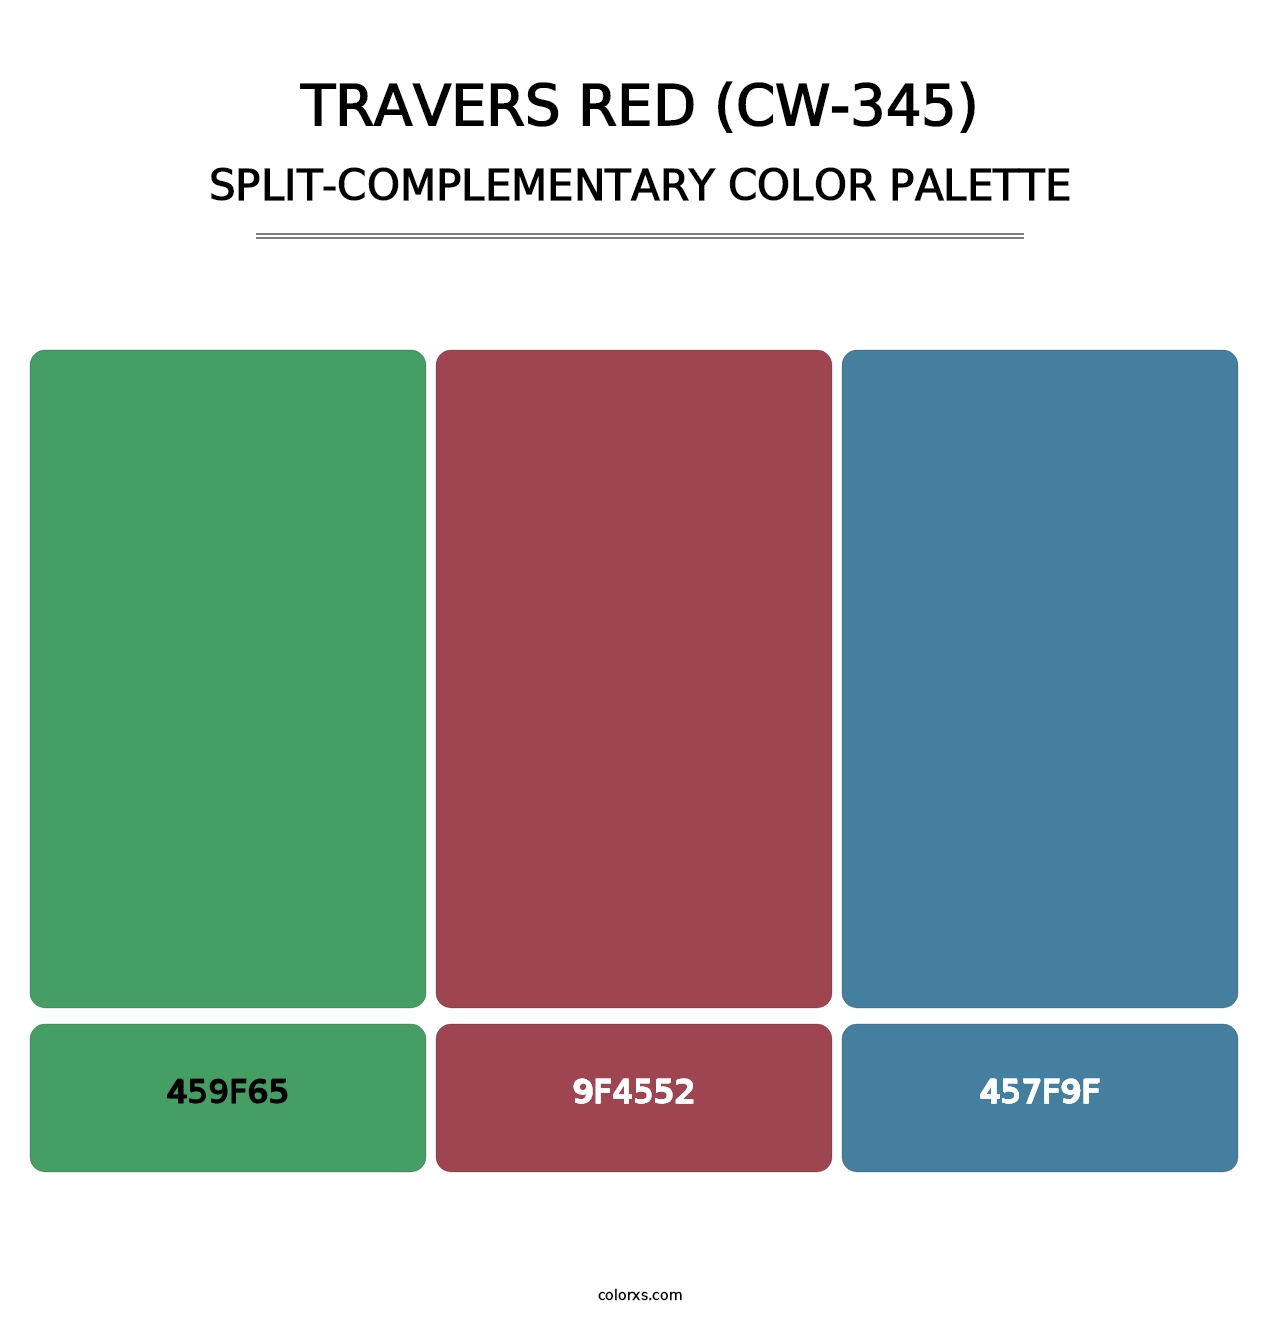 Travers Red (CW-345) - Split-Complementary Color Palette